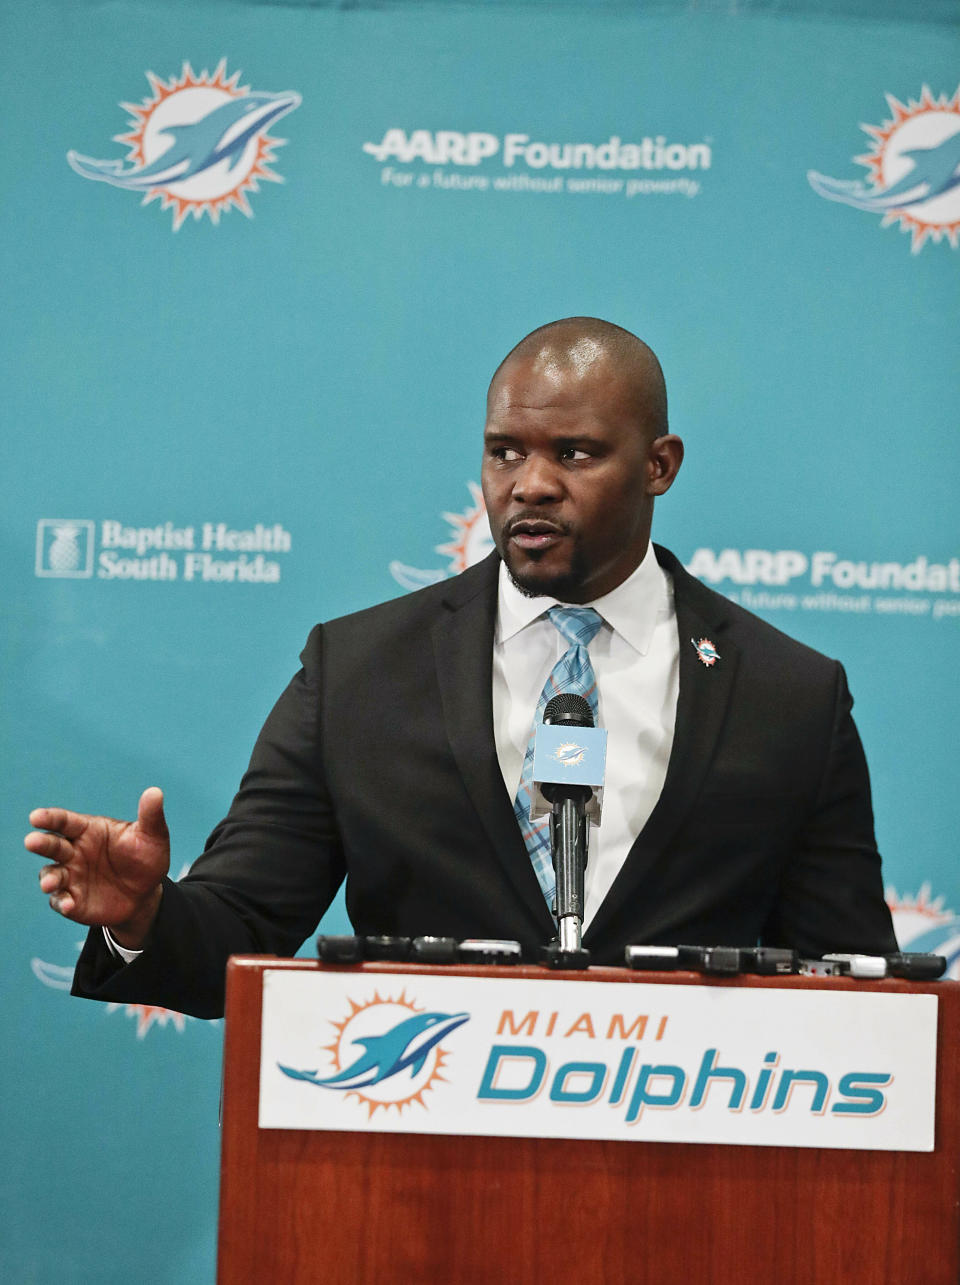 The new Miami Dolphin's head coach Brian Flores speaks during a news conference on Monday, Feb. 4, 2019, in Davie, Fla. Hours after his team won the Super Bowl, New England Patriots linebackers coach Flores has been hired as head coach of the Miami Dolphins. They decided on Jan. 11. (AP Photo/Brynn Anderson)